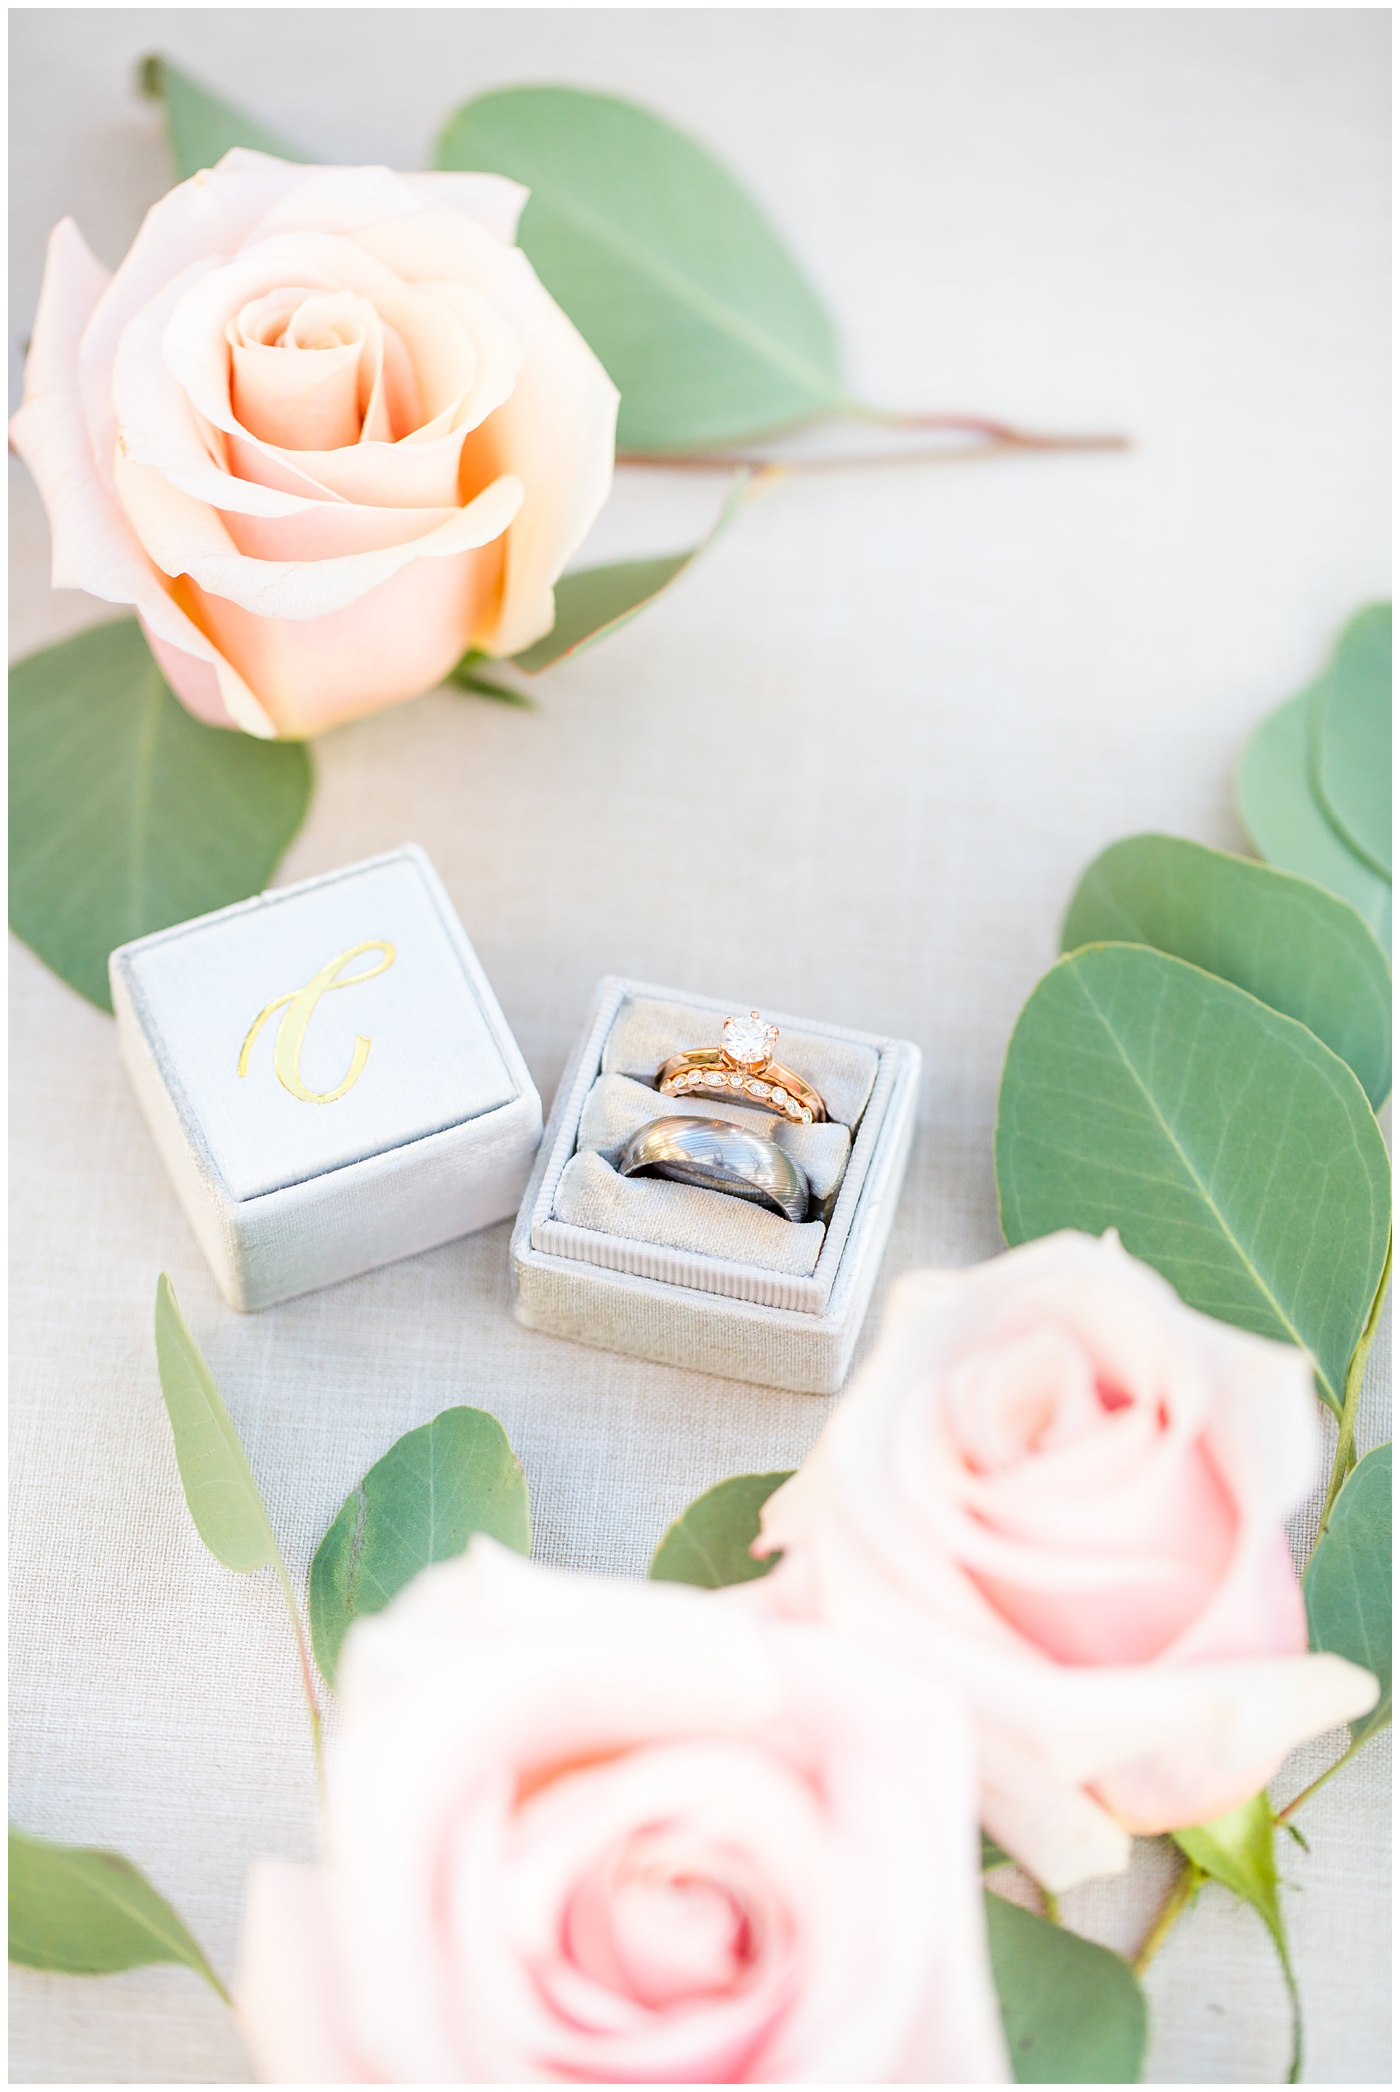 rose gold wedding bands and silver ring in gray mrs. box on wedding day details